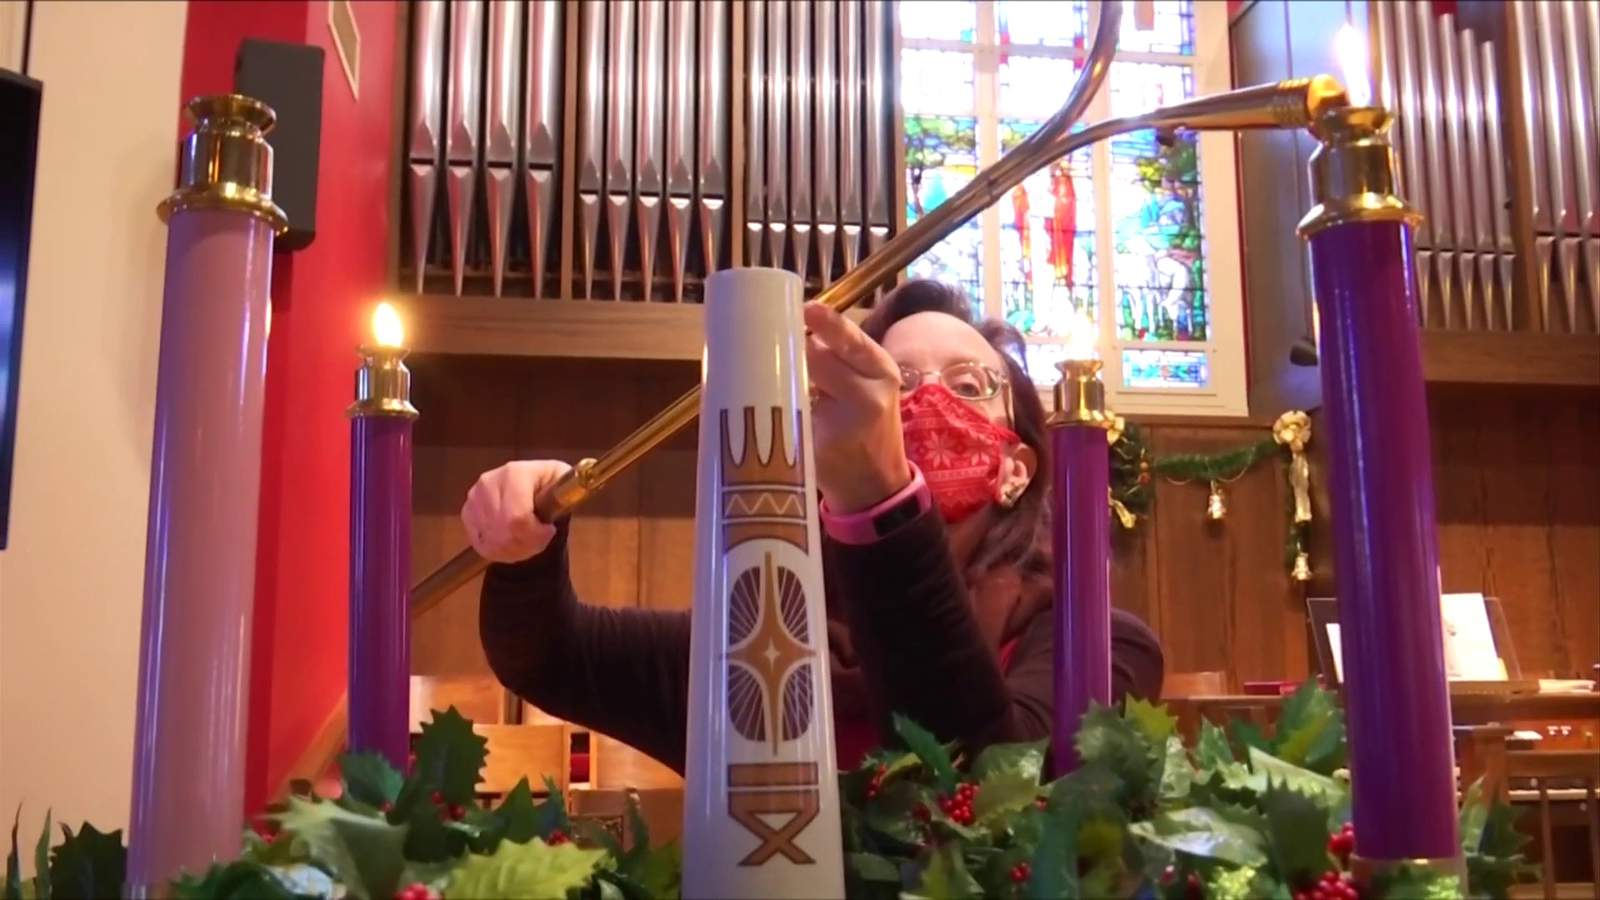 Local churches prepare for Christmas services amid pandemic